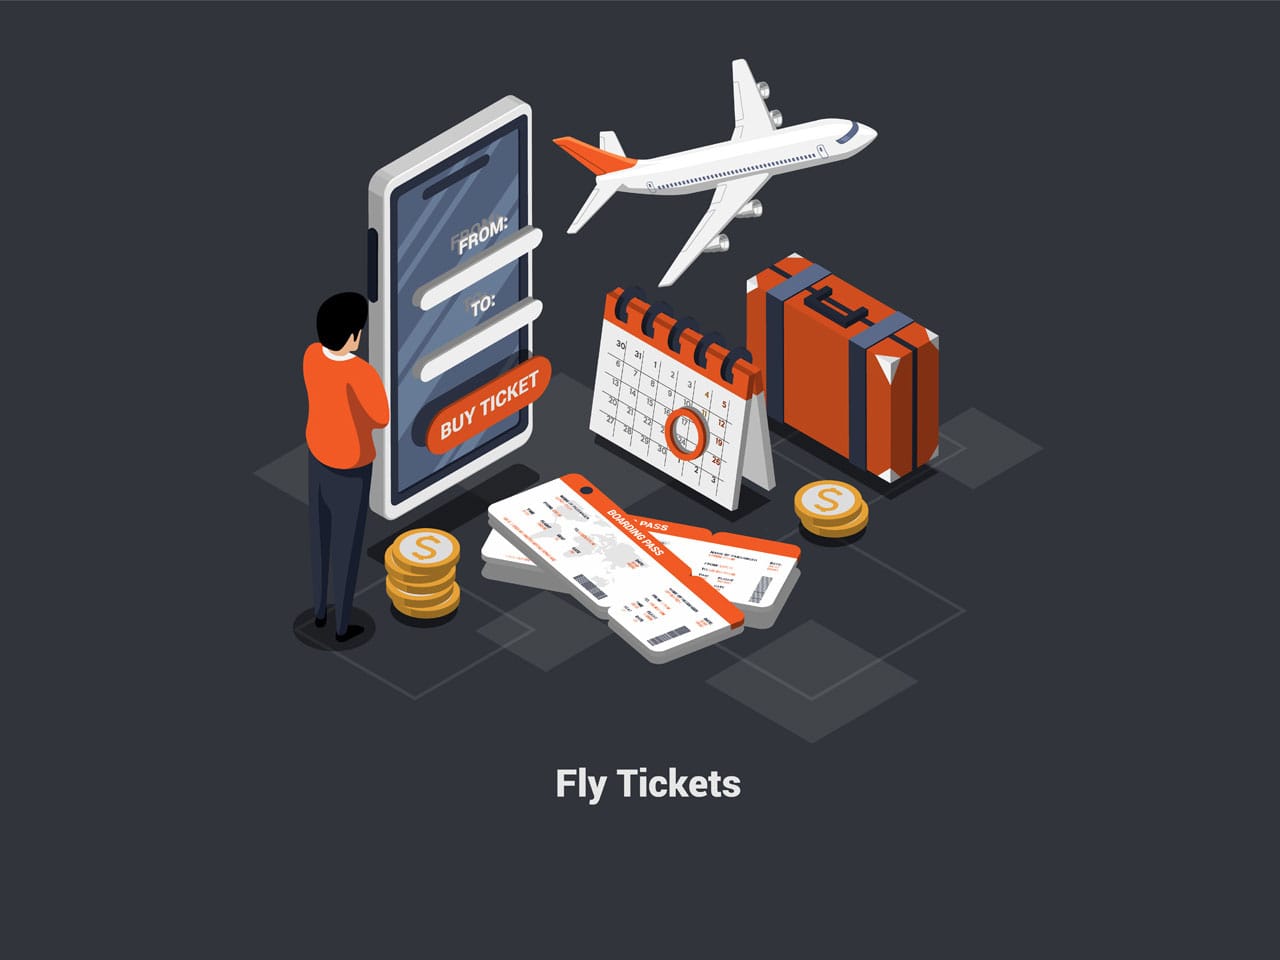 Online buying fly tickets traveling by plane concept man buying tickets using mobile app smartphone character getting boarding pass checkin luggage isometric 3d cartoon illustration